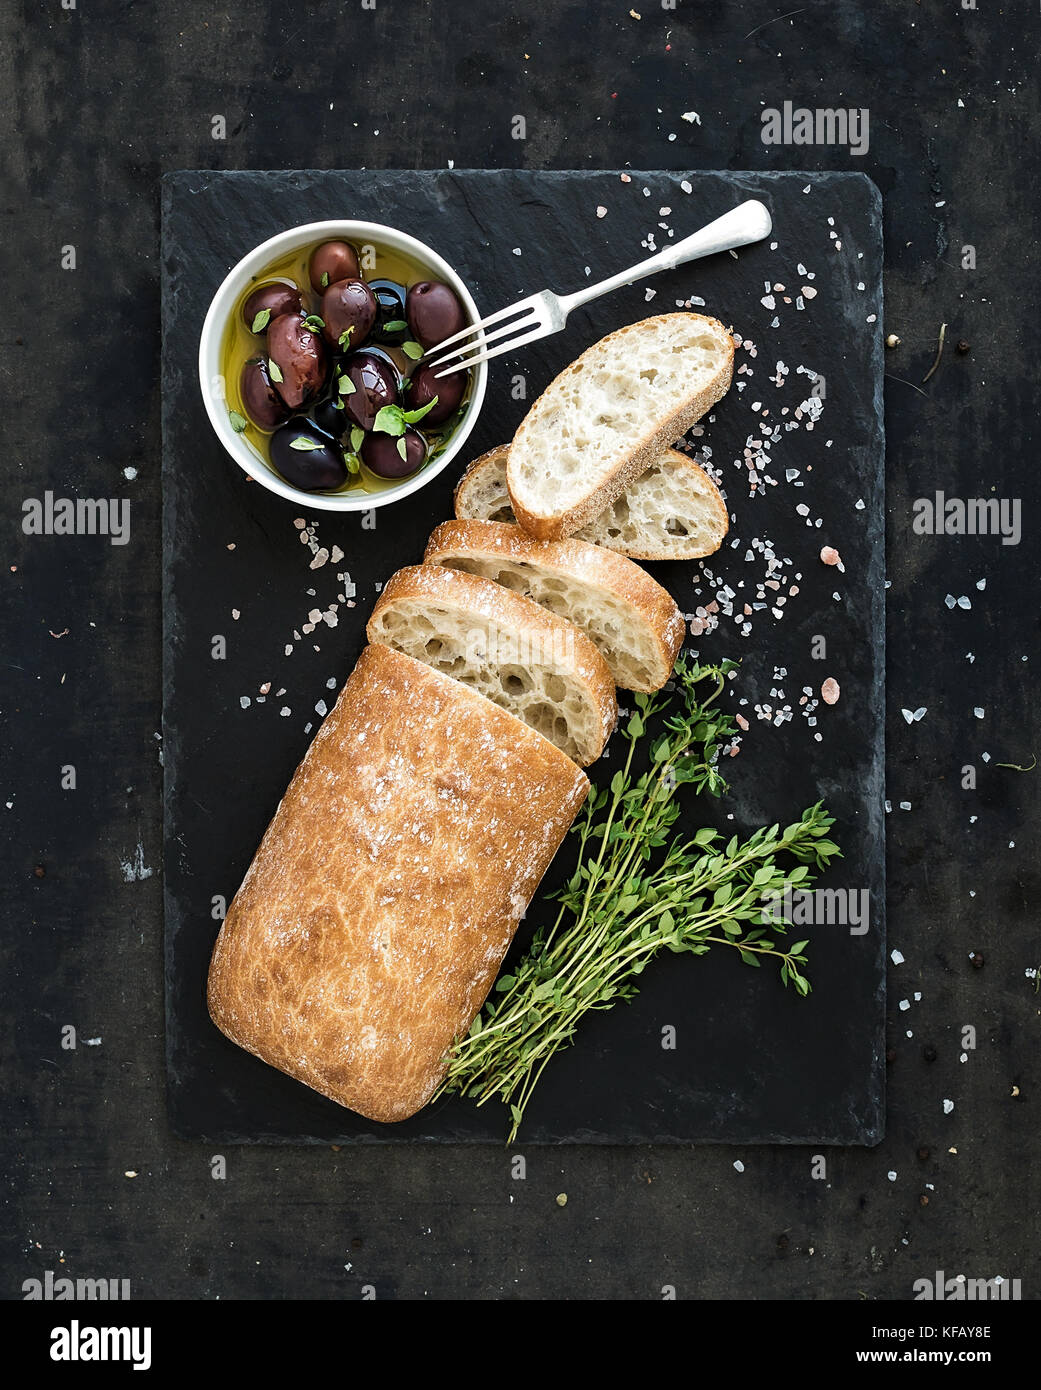 Italian ciabatta bread cut in slices on wooden chopping board with herbs, garlic and olives over dark grunge backdrop, top view Stock Photo